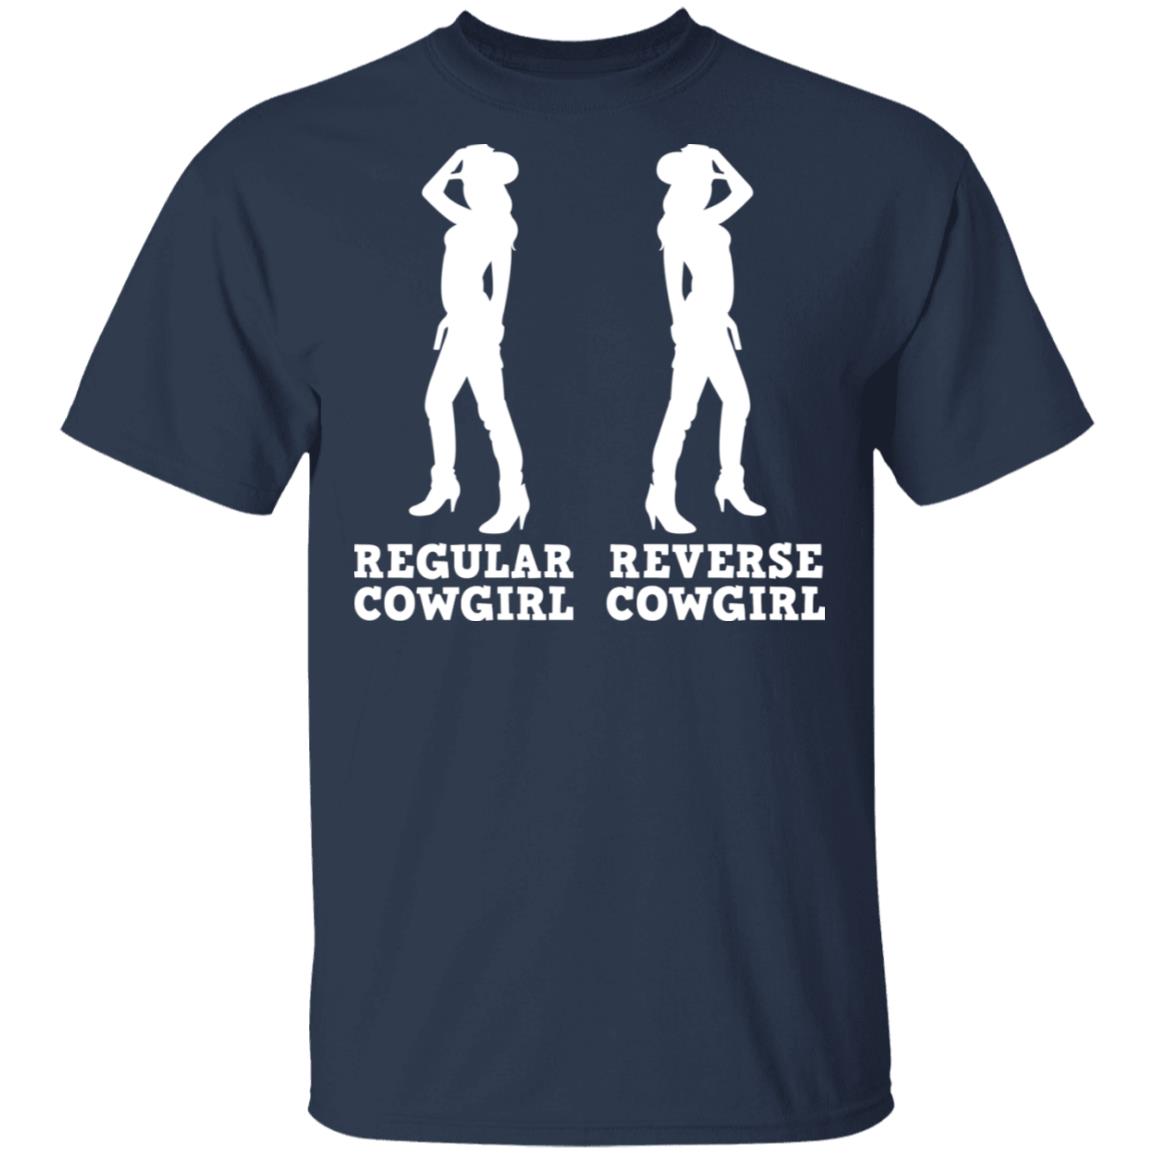 Regular Cowgirl Reverse Cowgirl Shirt Allbluetees Online T Shirt Store Perfect For Your